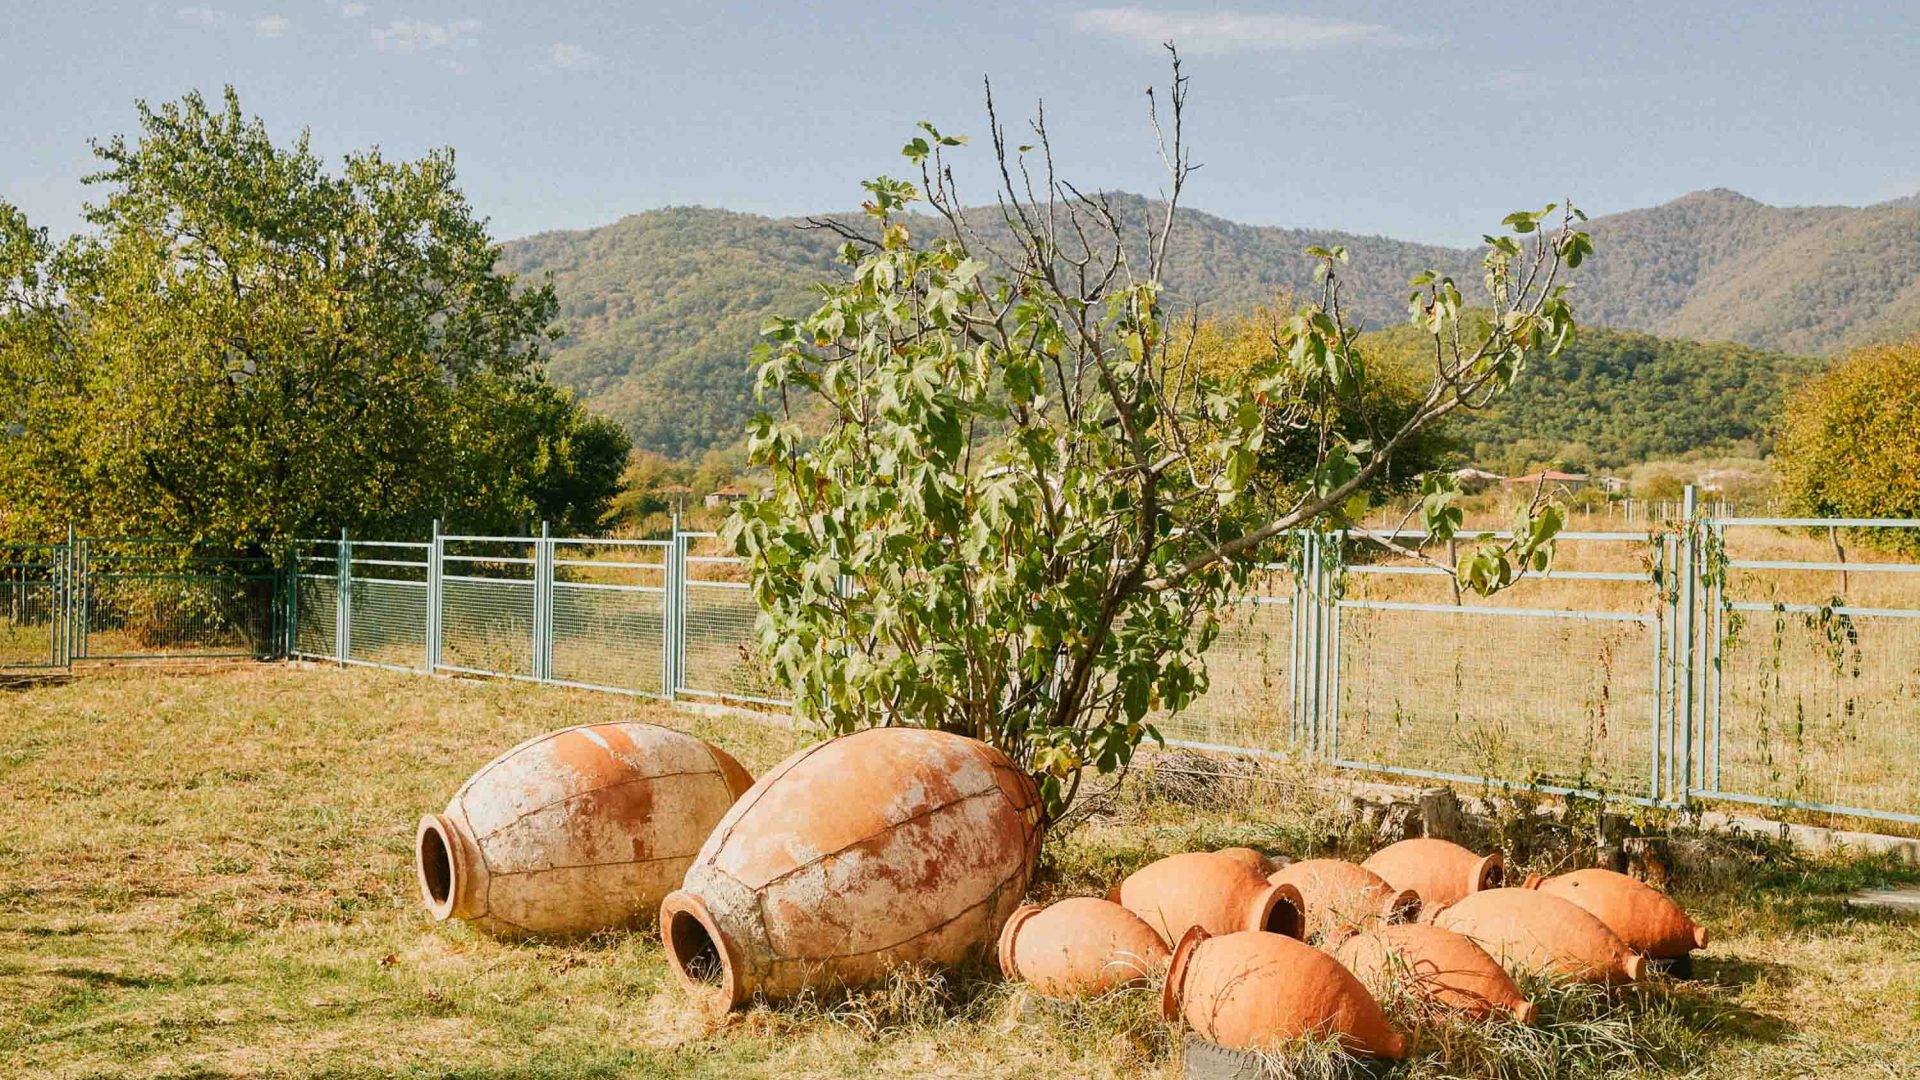 Jugs for holding wine, under a tree.